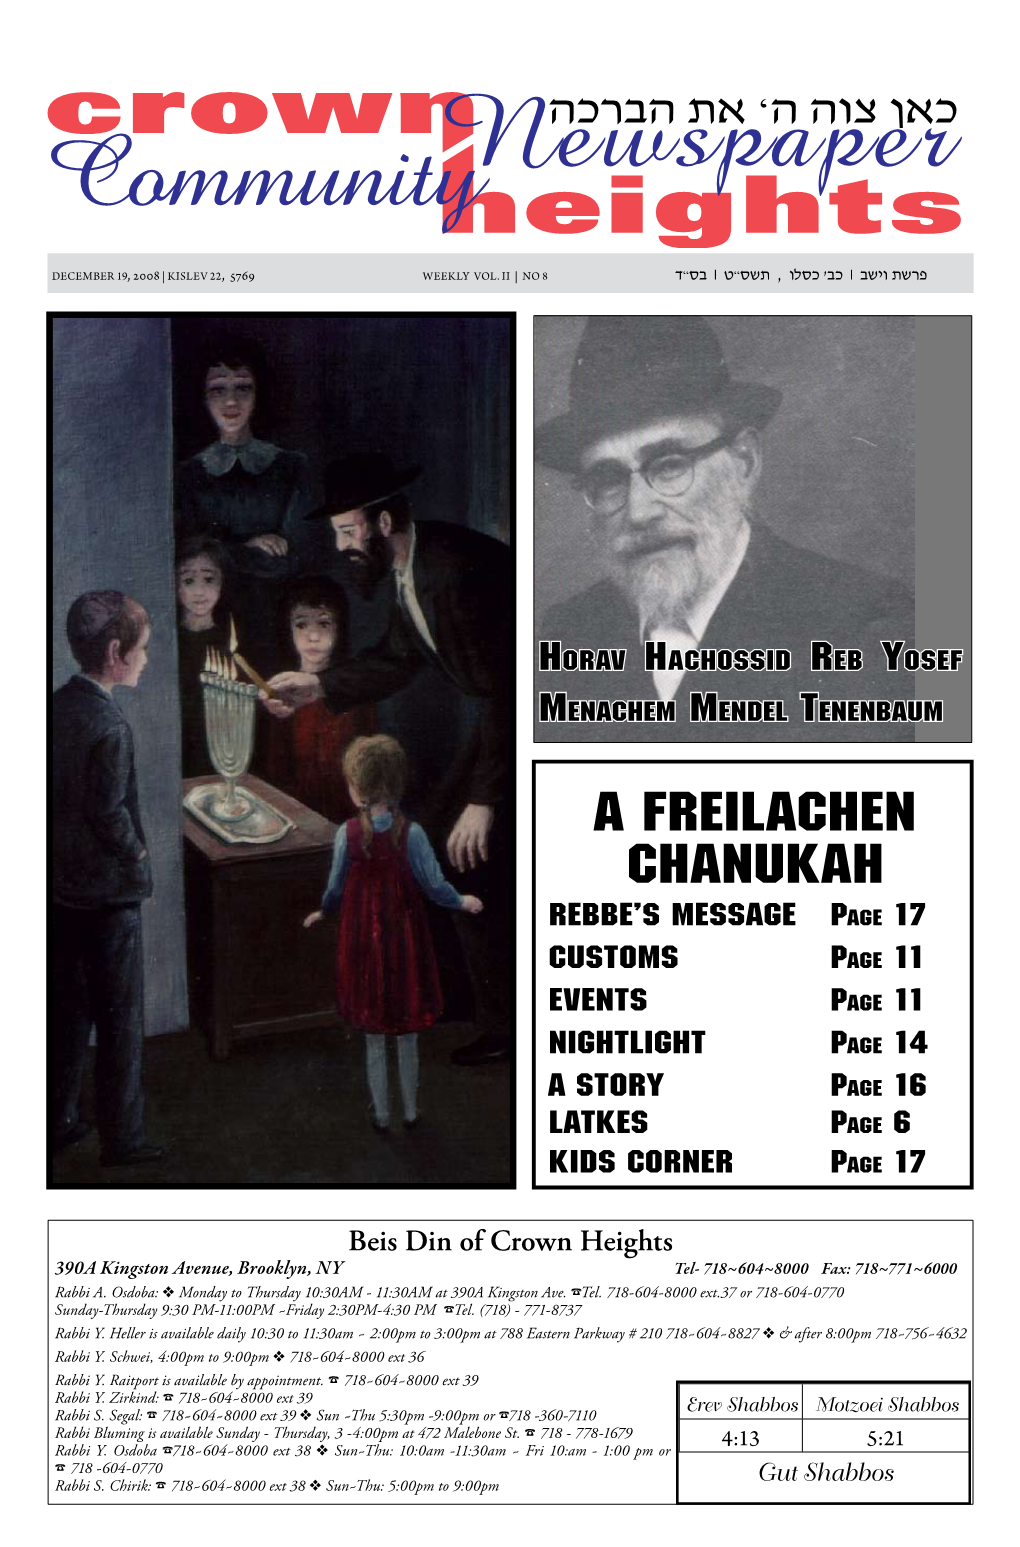 A FREILACHEN CHANUKAH REBBE's MESSAGE Page 17 CUSTOMS Page 11 EVENTS Page 11 NIGHTLIGHT Page 14 a STORY Page 16 Latkes Page 6 Kids Corner Page 17